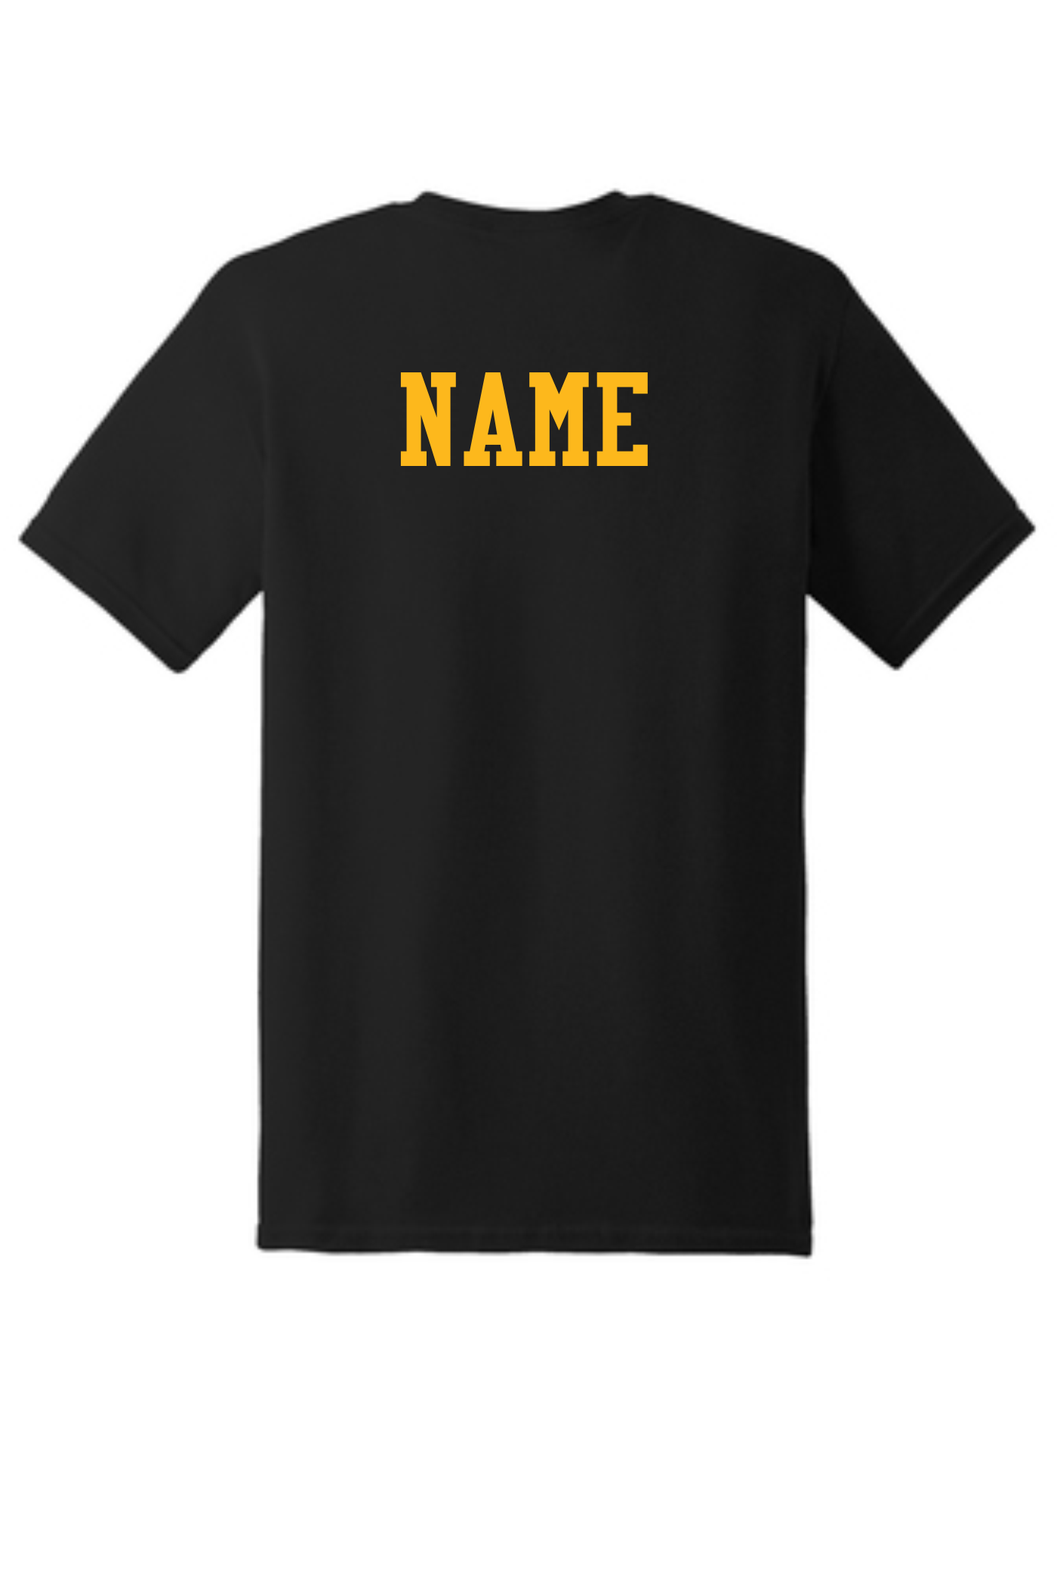 Add A name to a Garment